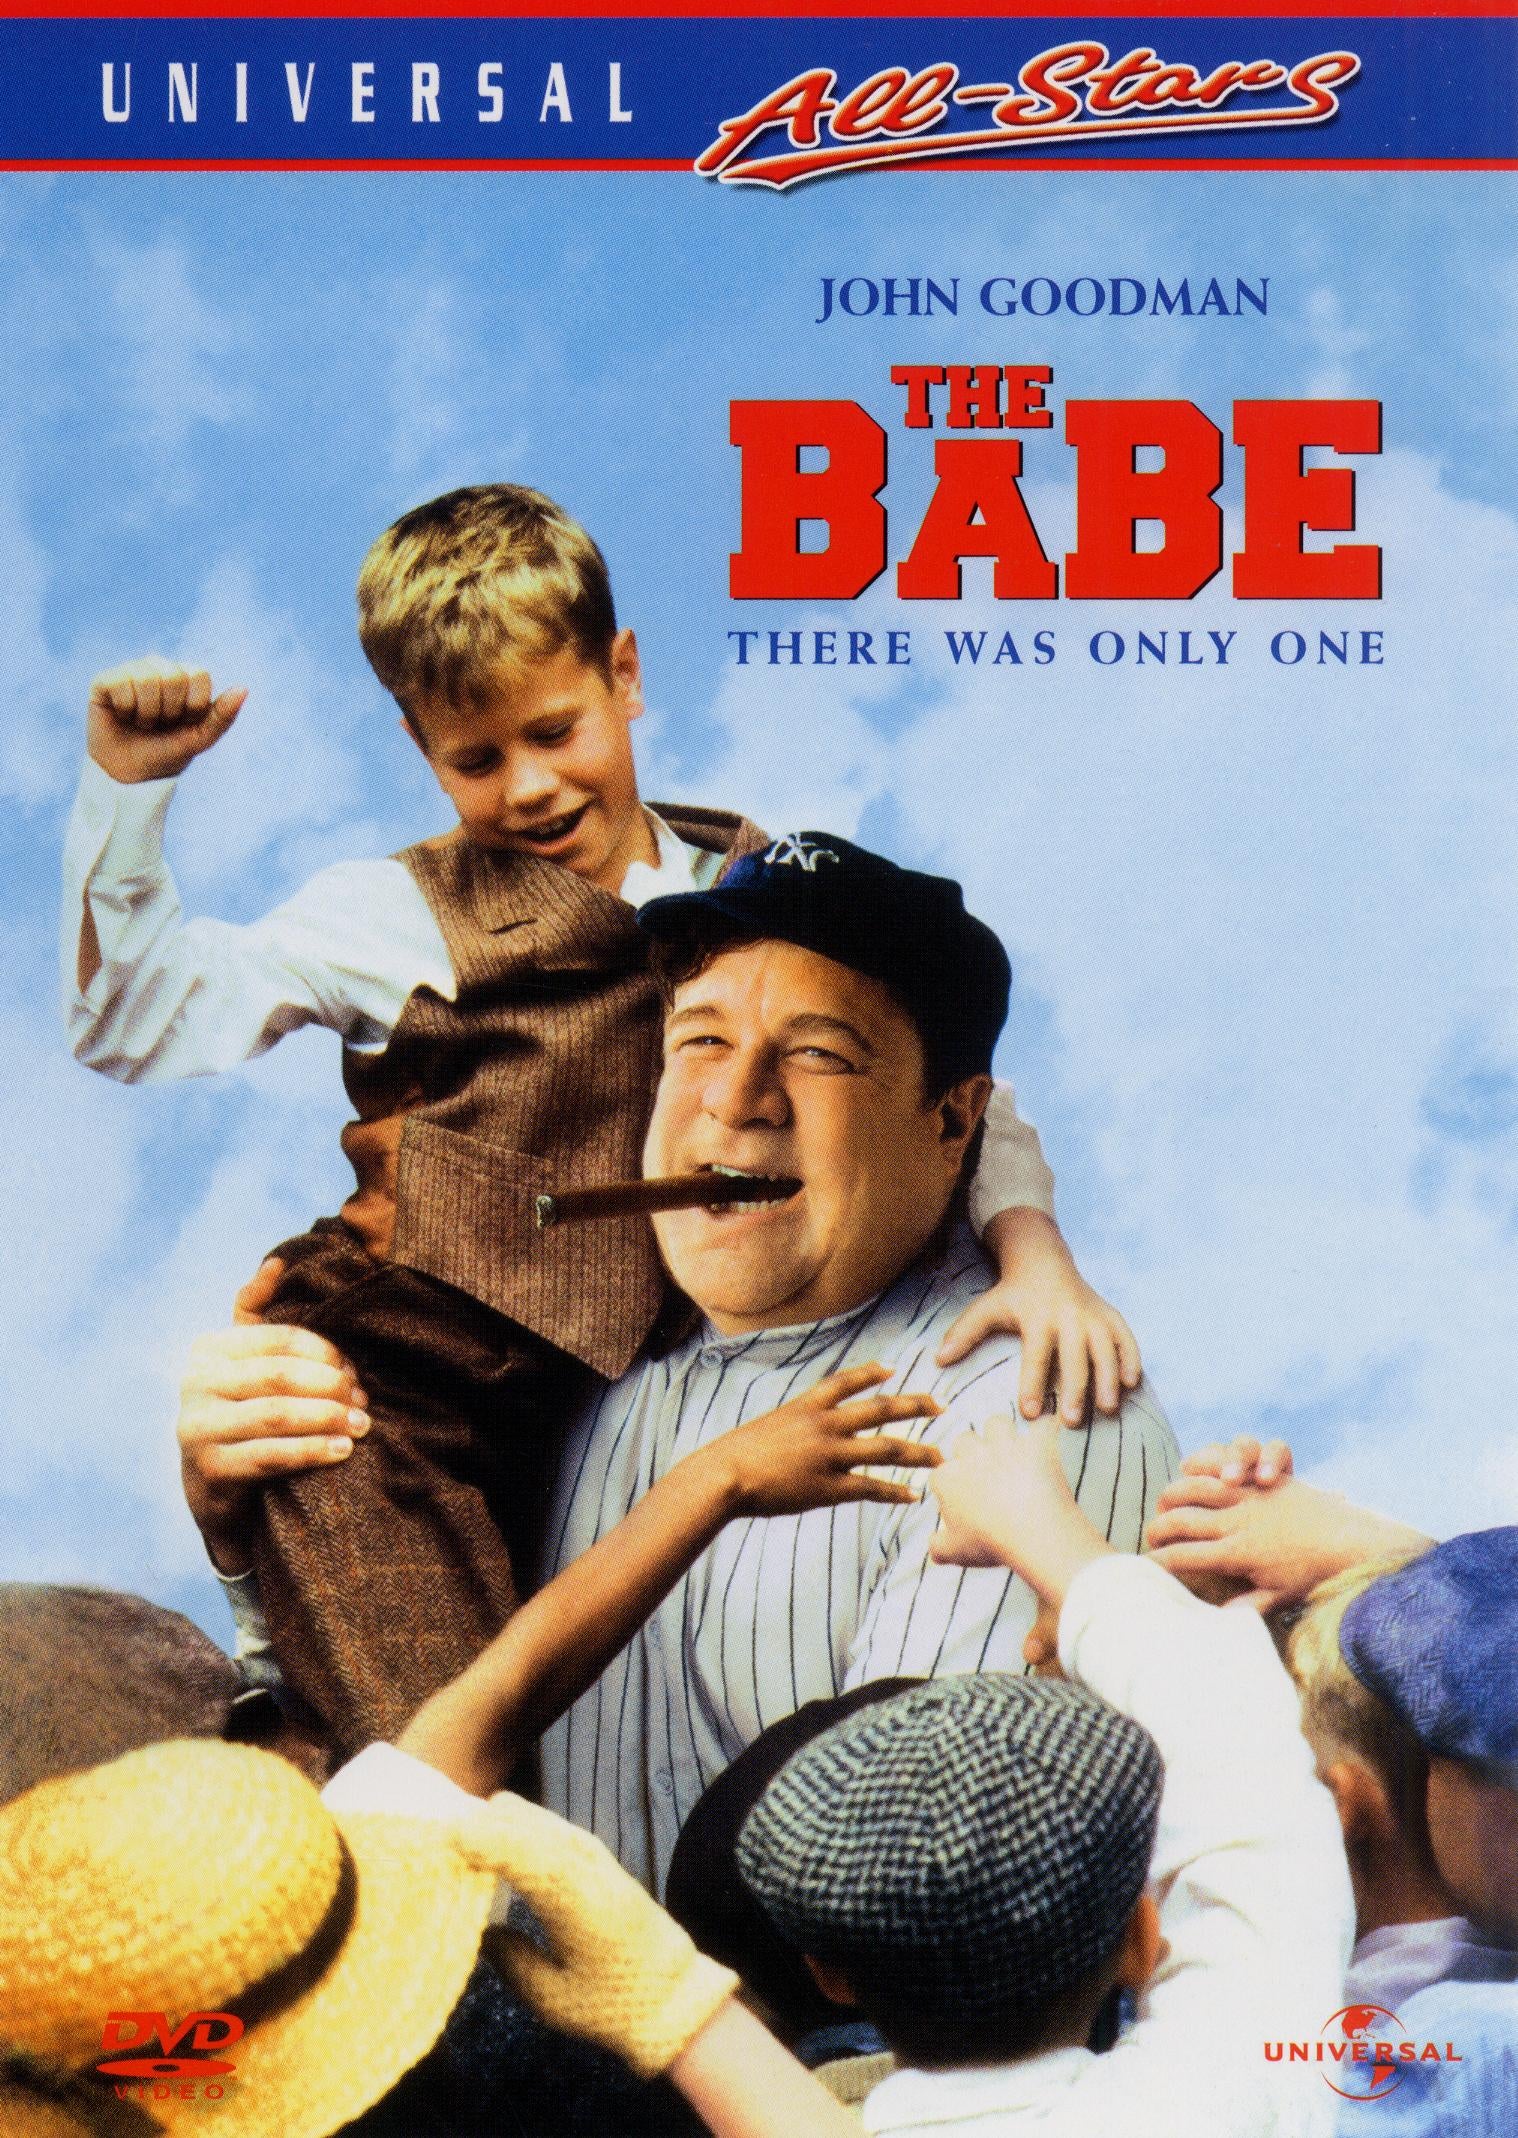 Babe cover art